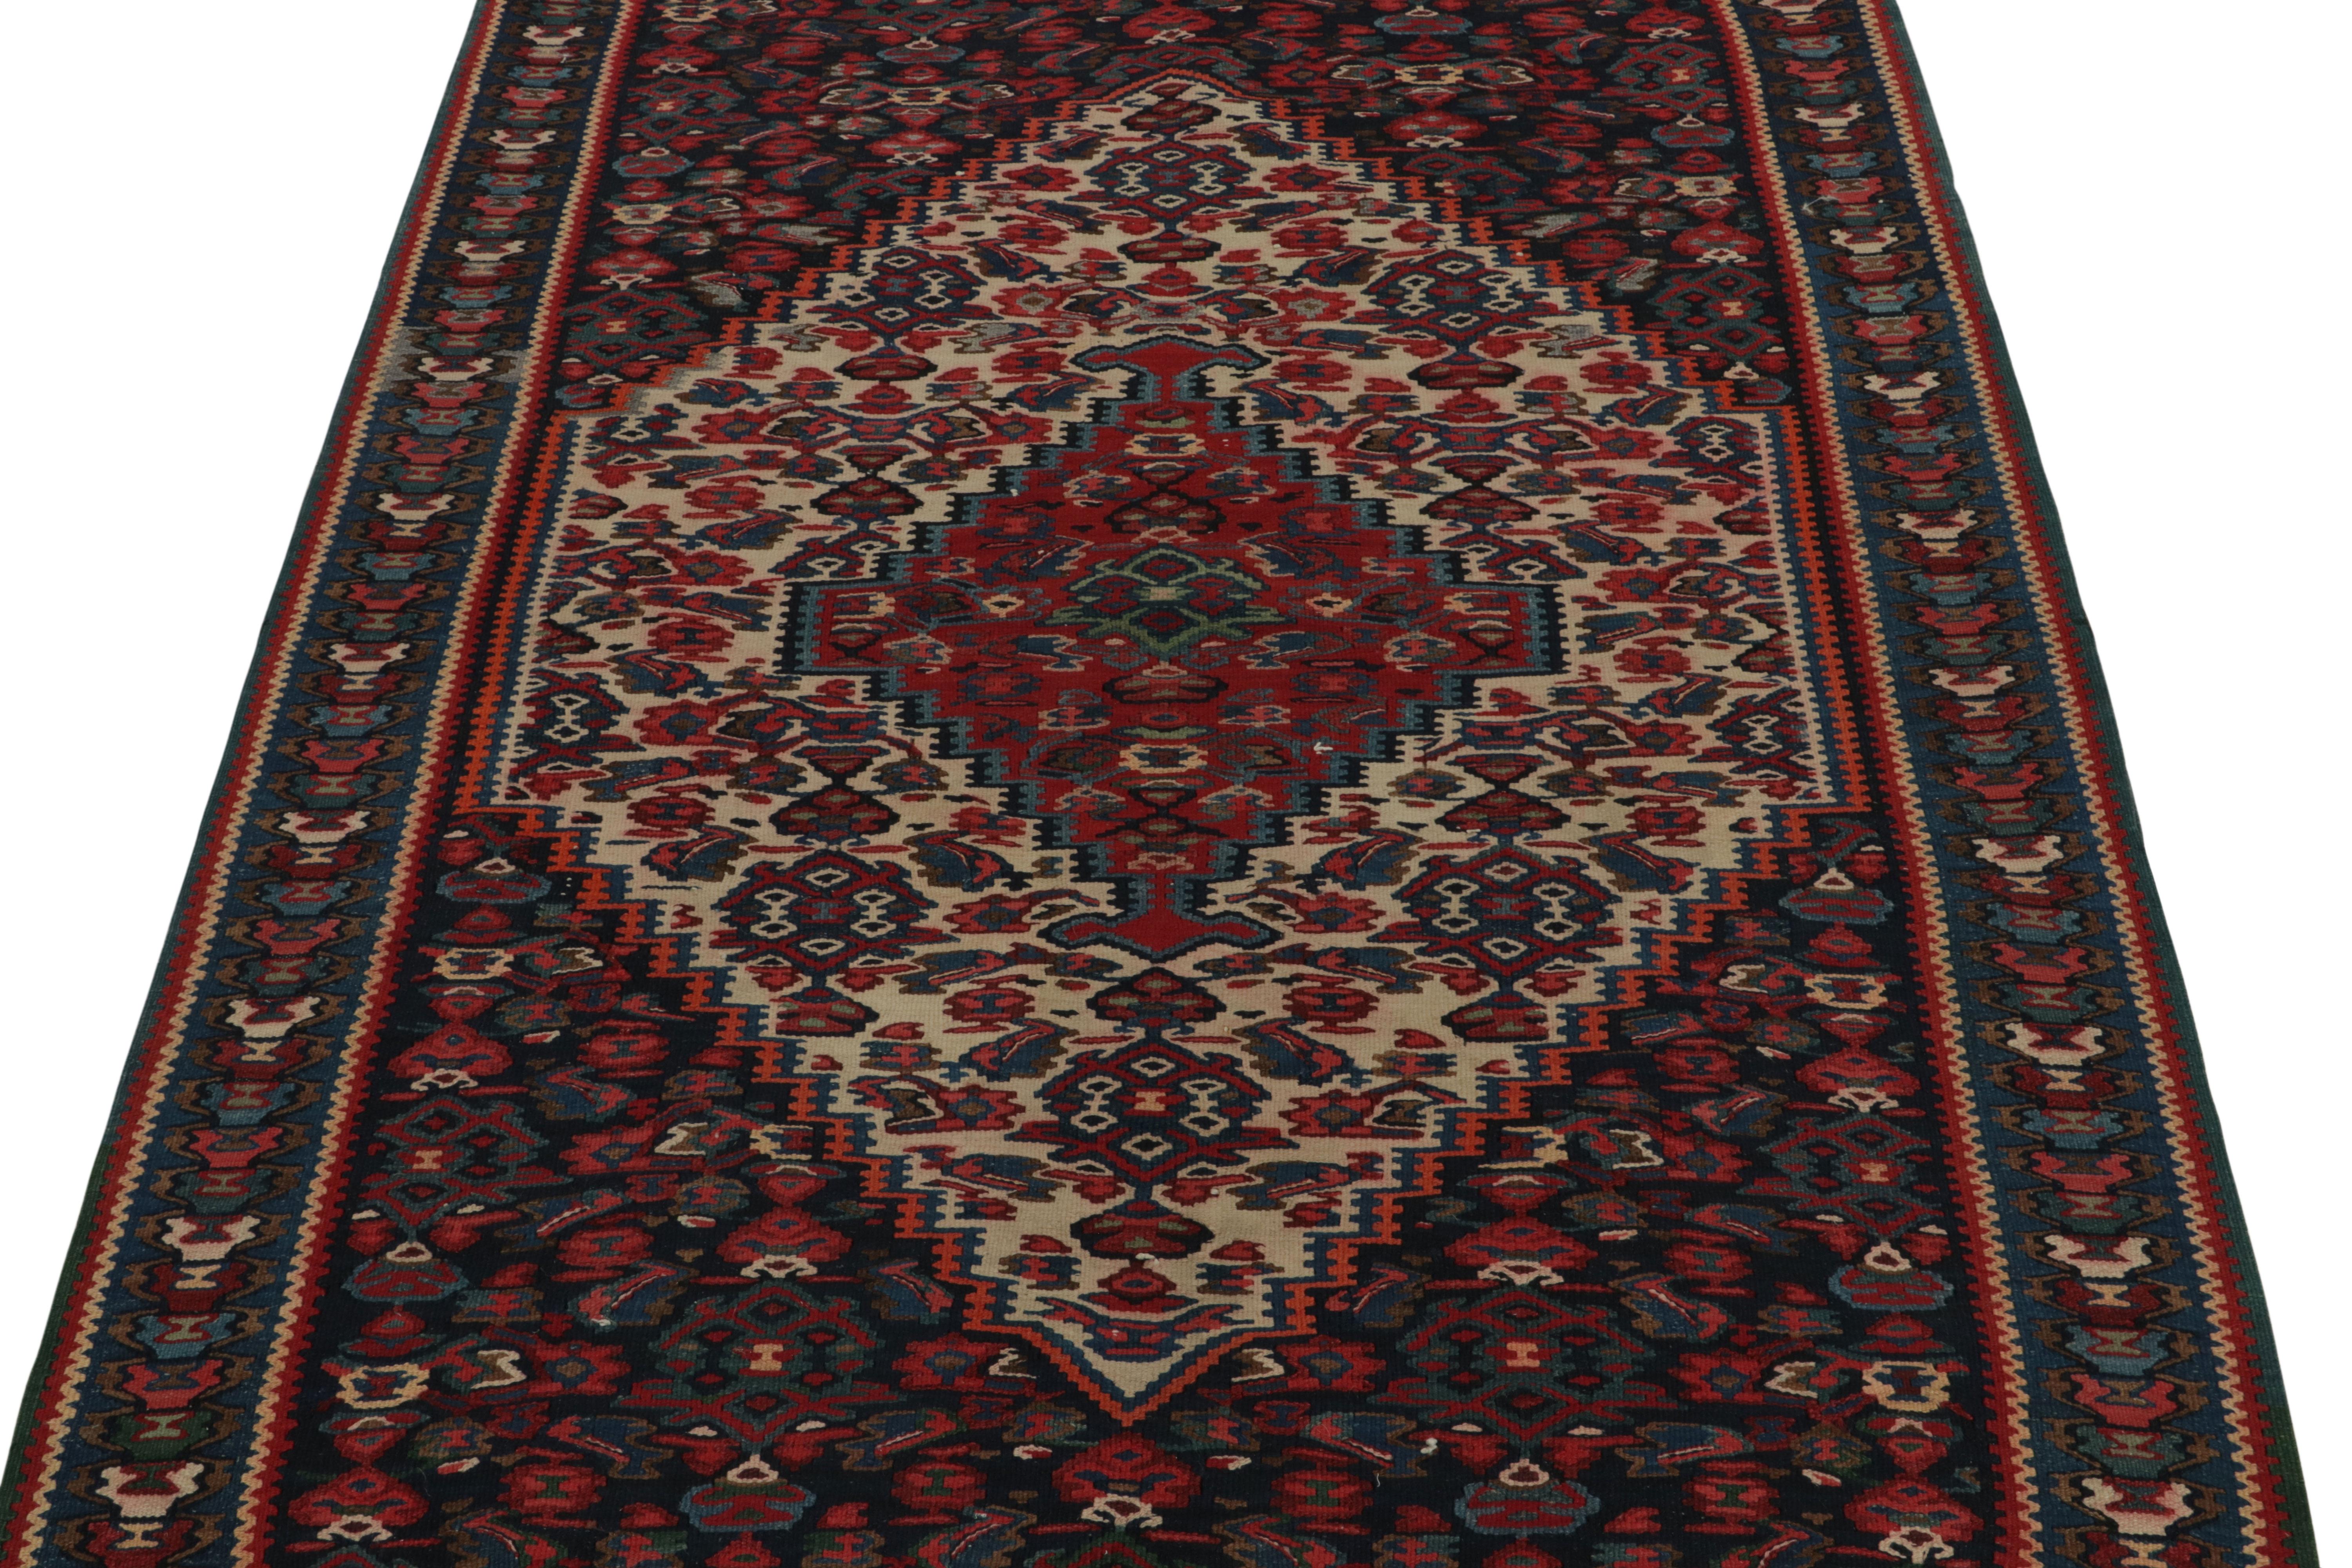 Persian 1950s Vintage Senneh Kilim in Red, Blue & White Tribal pattern by Rug & Kilim For Sale